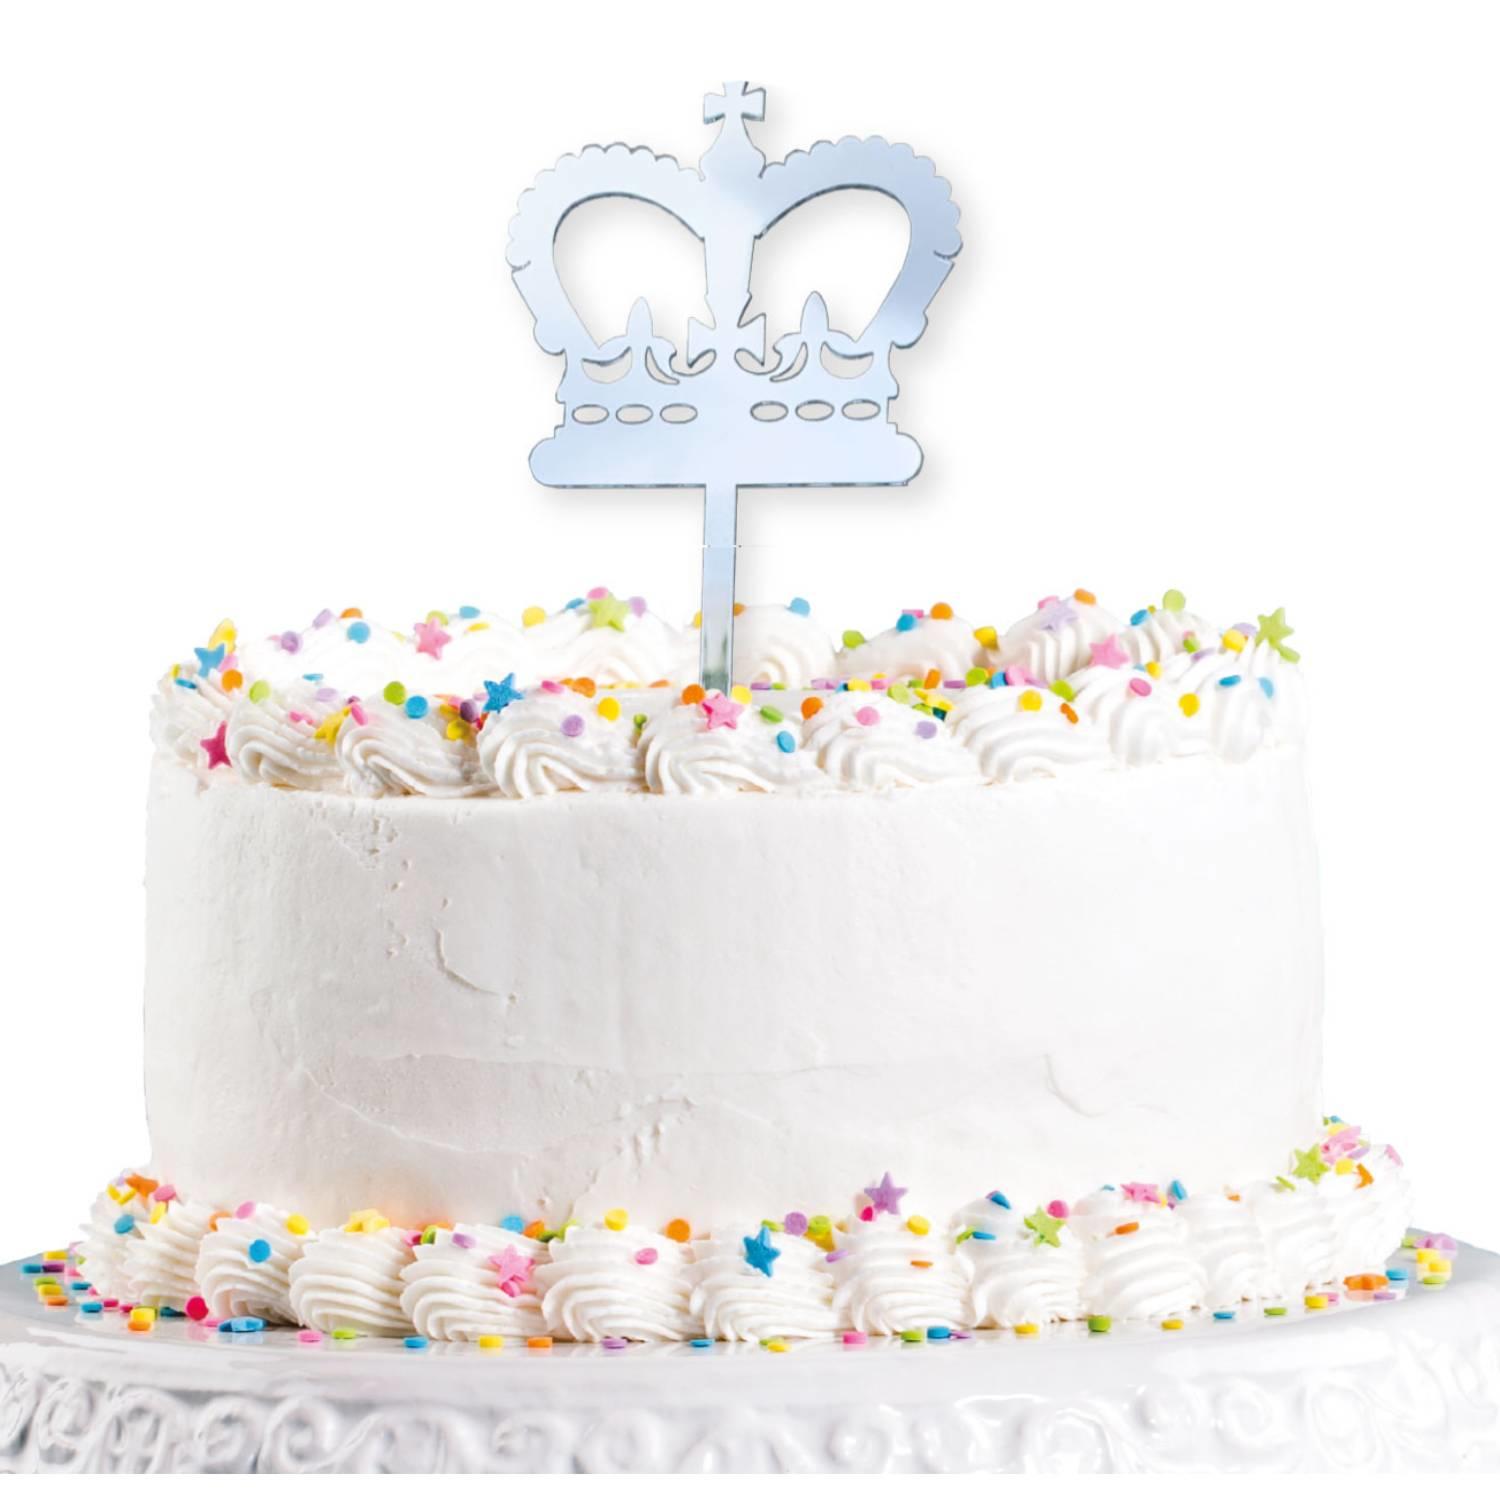 Acrylic Crown Cake Topper 16.7cm by Amscan 9913015 available here at Karnival Costumes online party shop